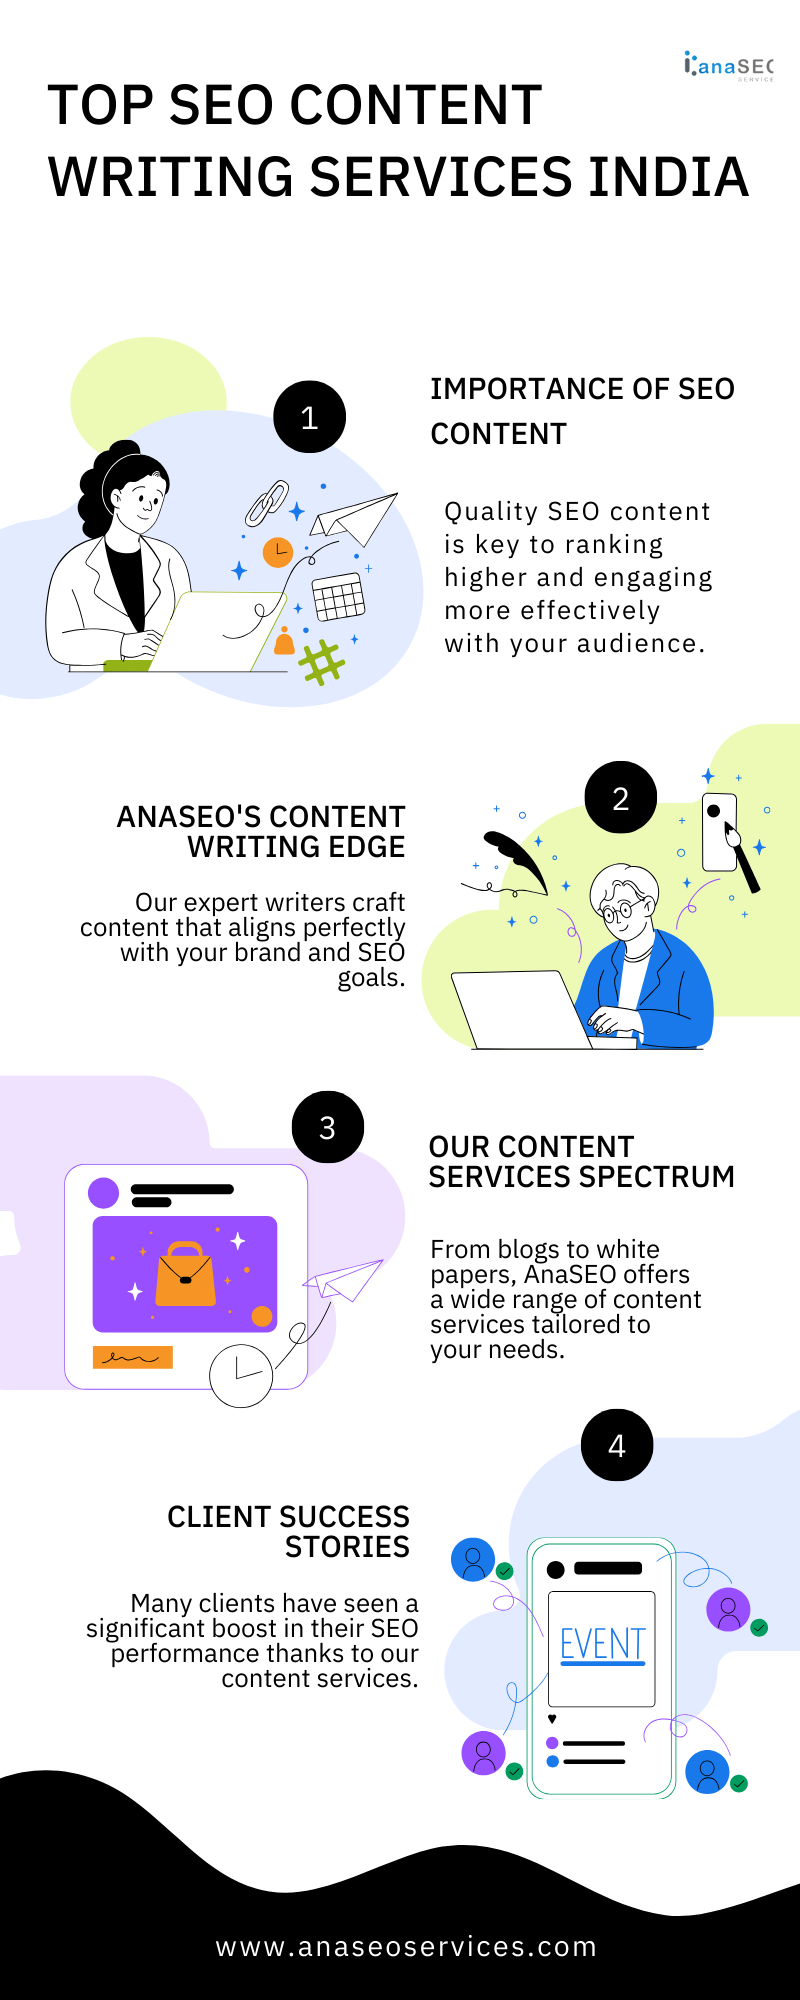 Top SEO Content Writing Services India: anaseoservices.com